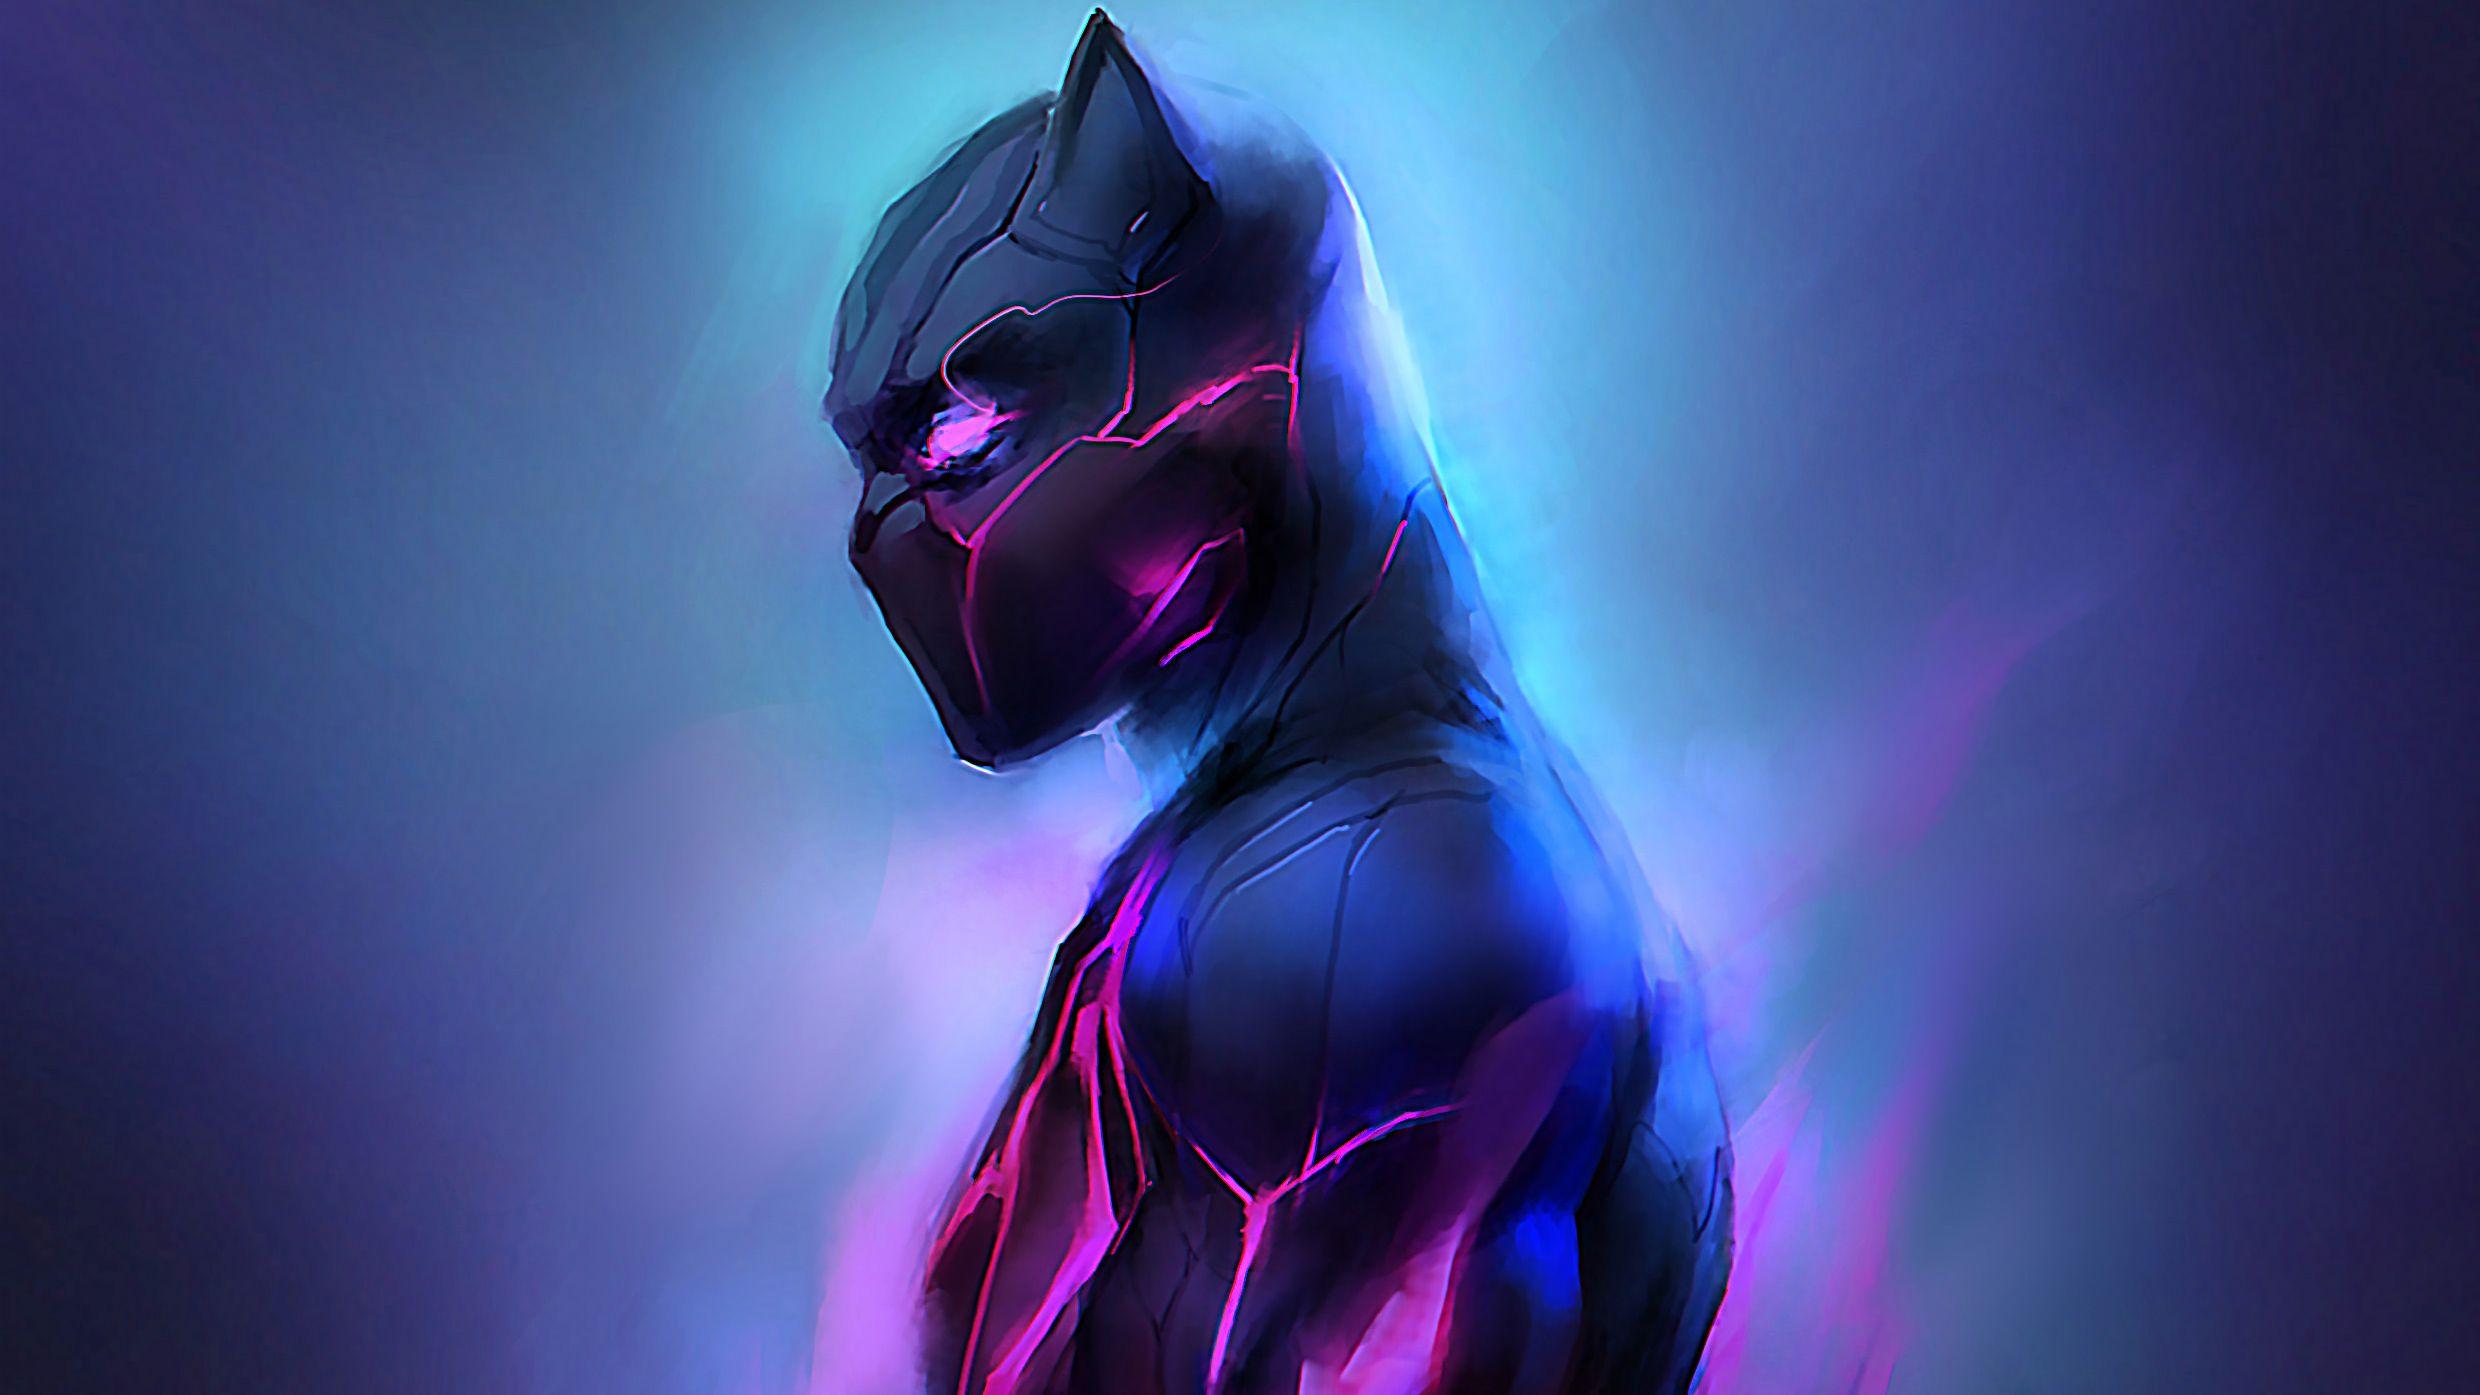 Neon Panther Wallpapers - Top Free Neon Panther Backgrounds